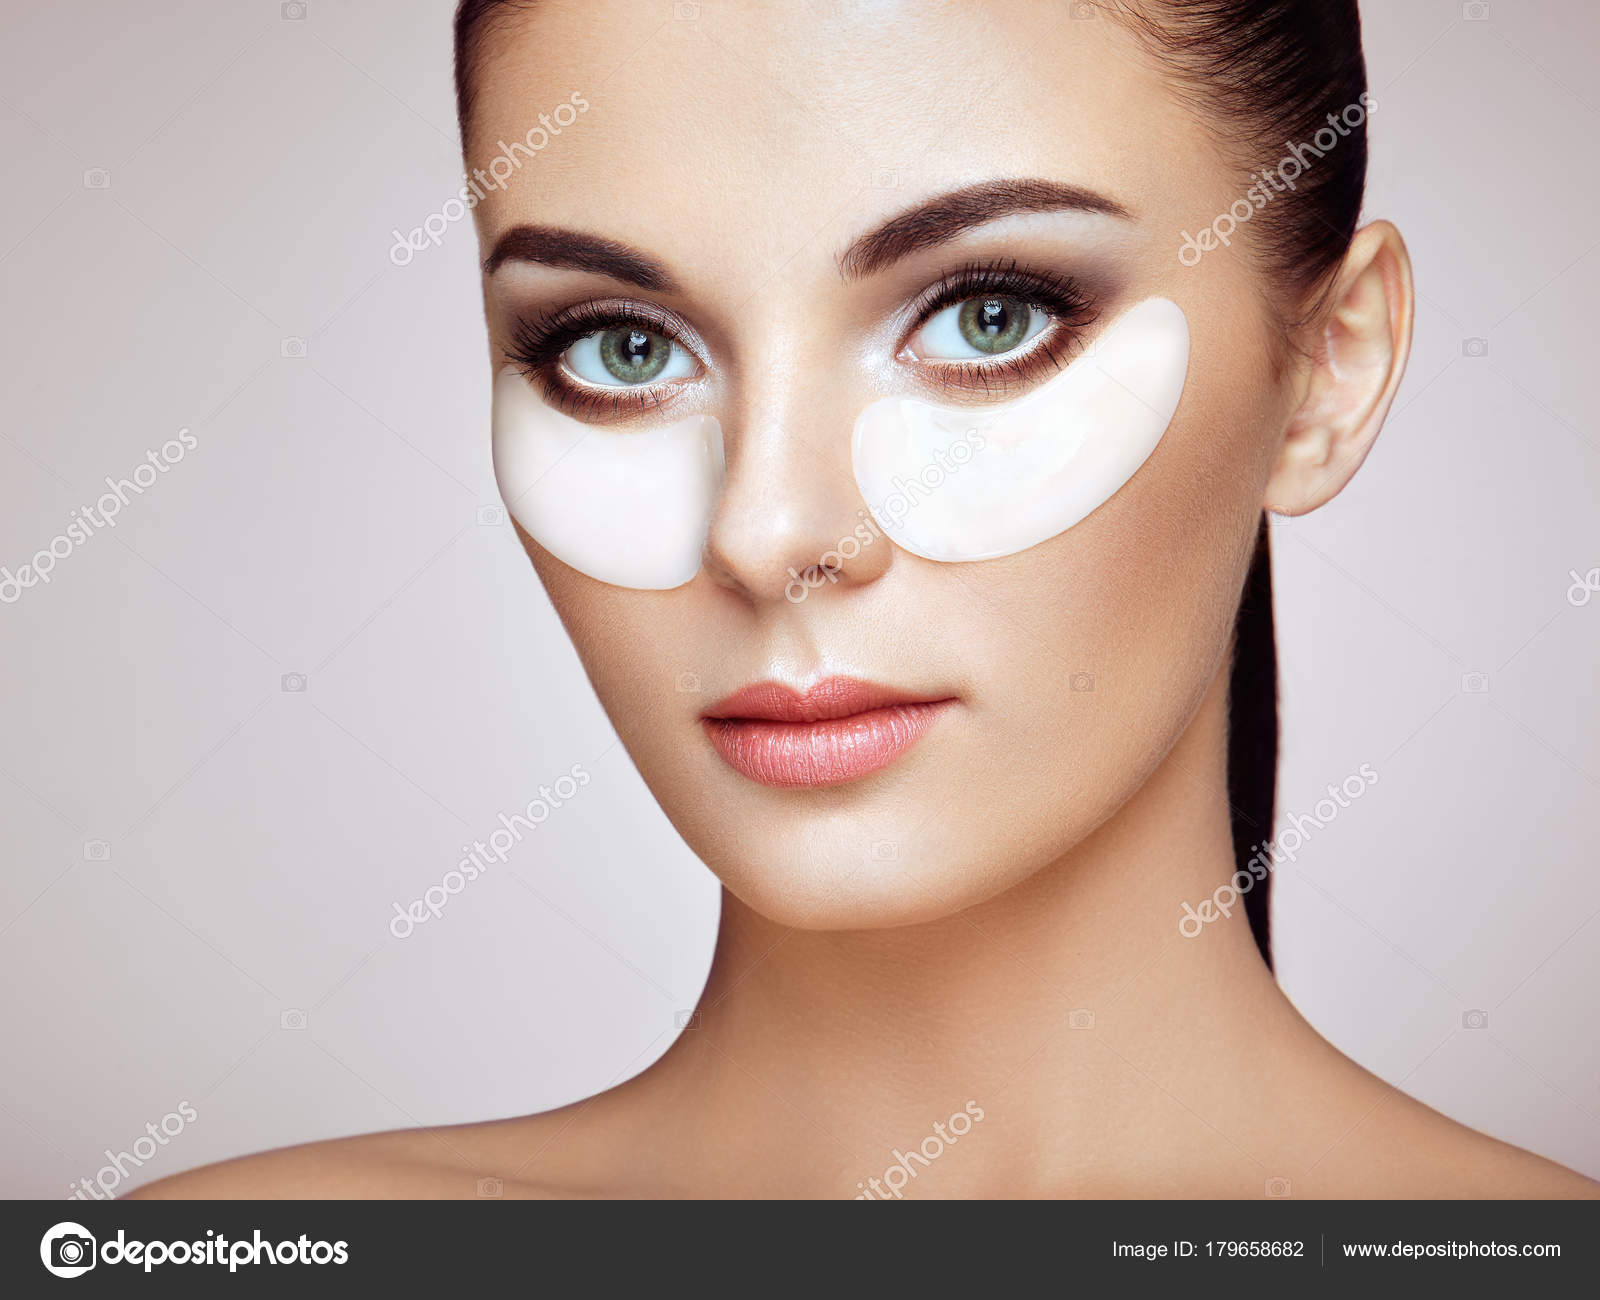 White Makeup Under Eyes Portrait Of Beauty Woman With Eye Patches Stock Photo